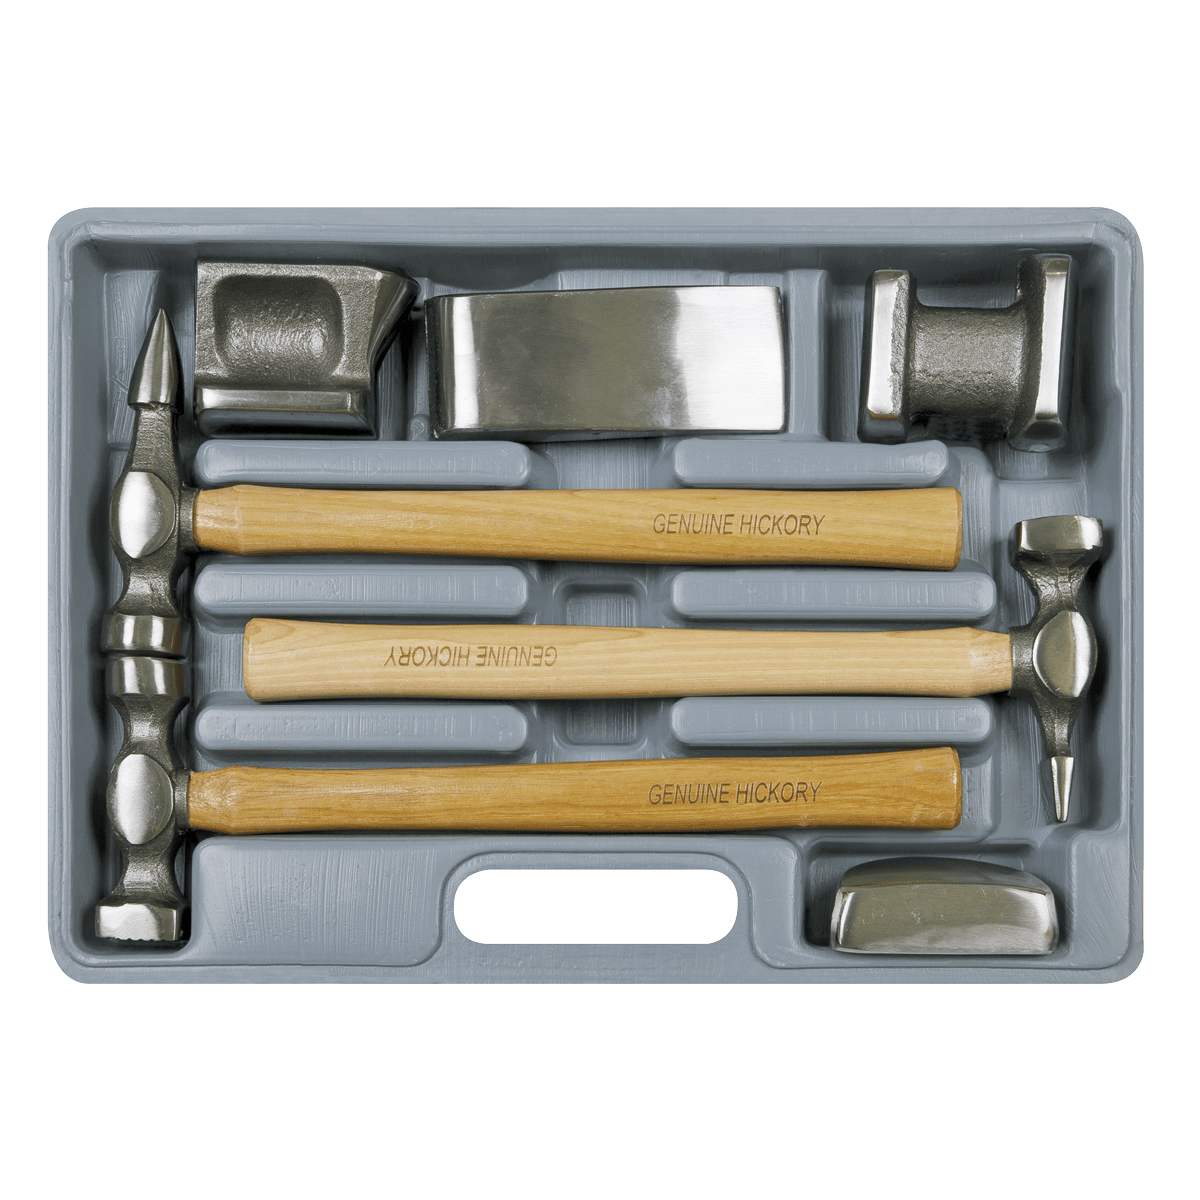 Sealey Panel Beating Set 7pc Drop-Forged Hickory Shafts CB507